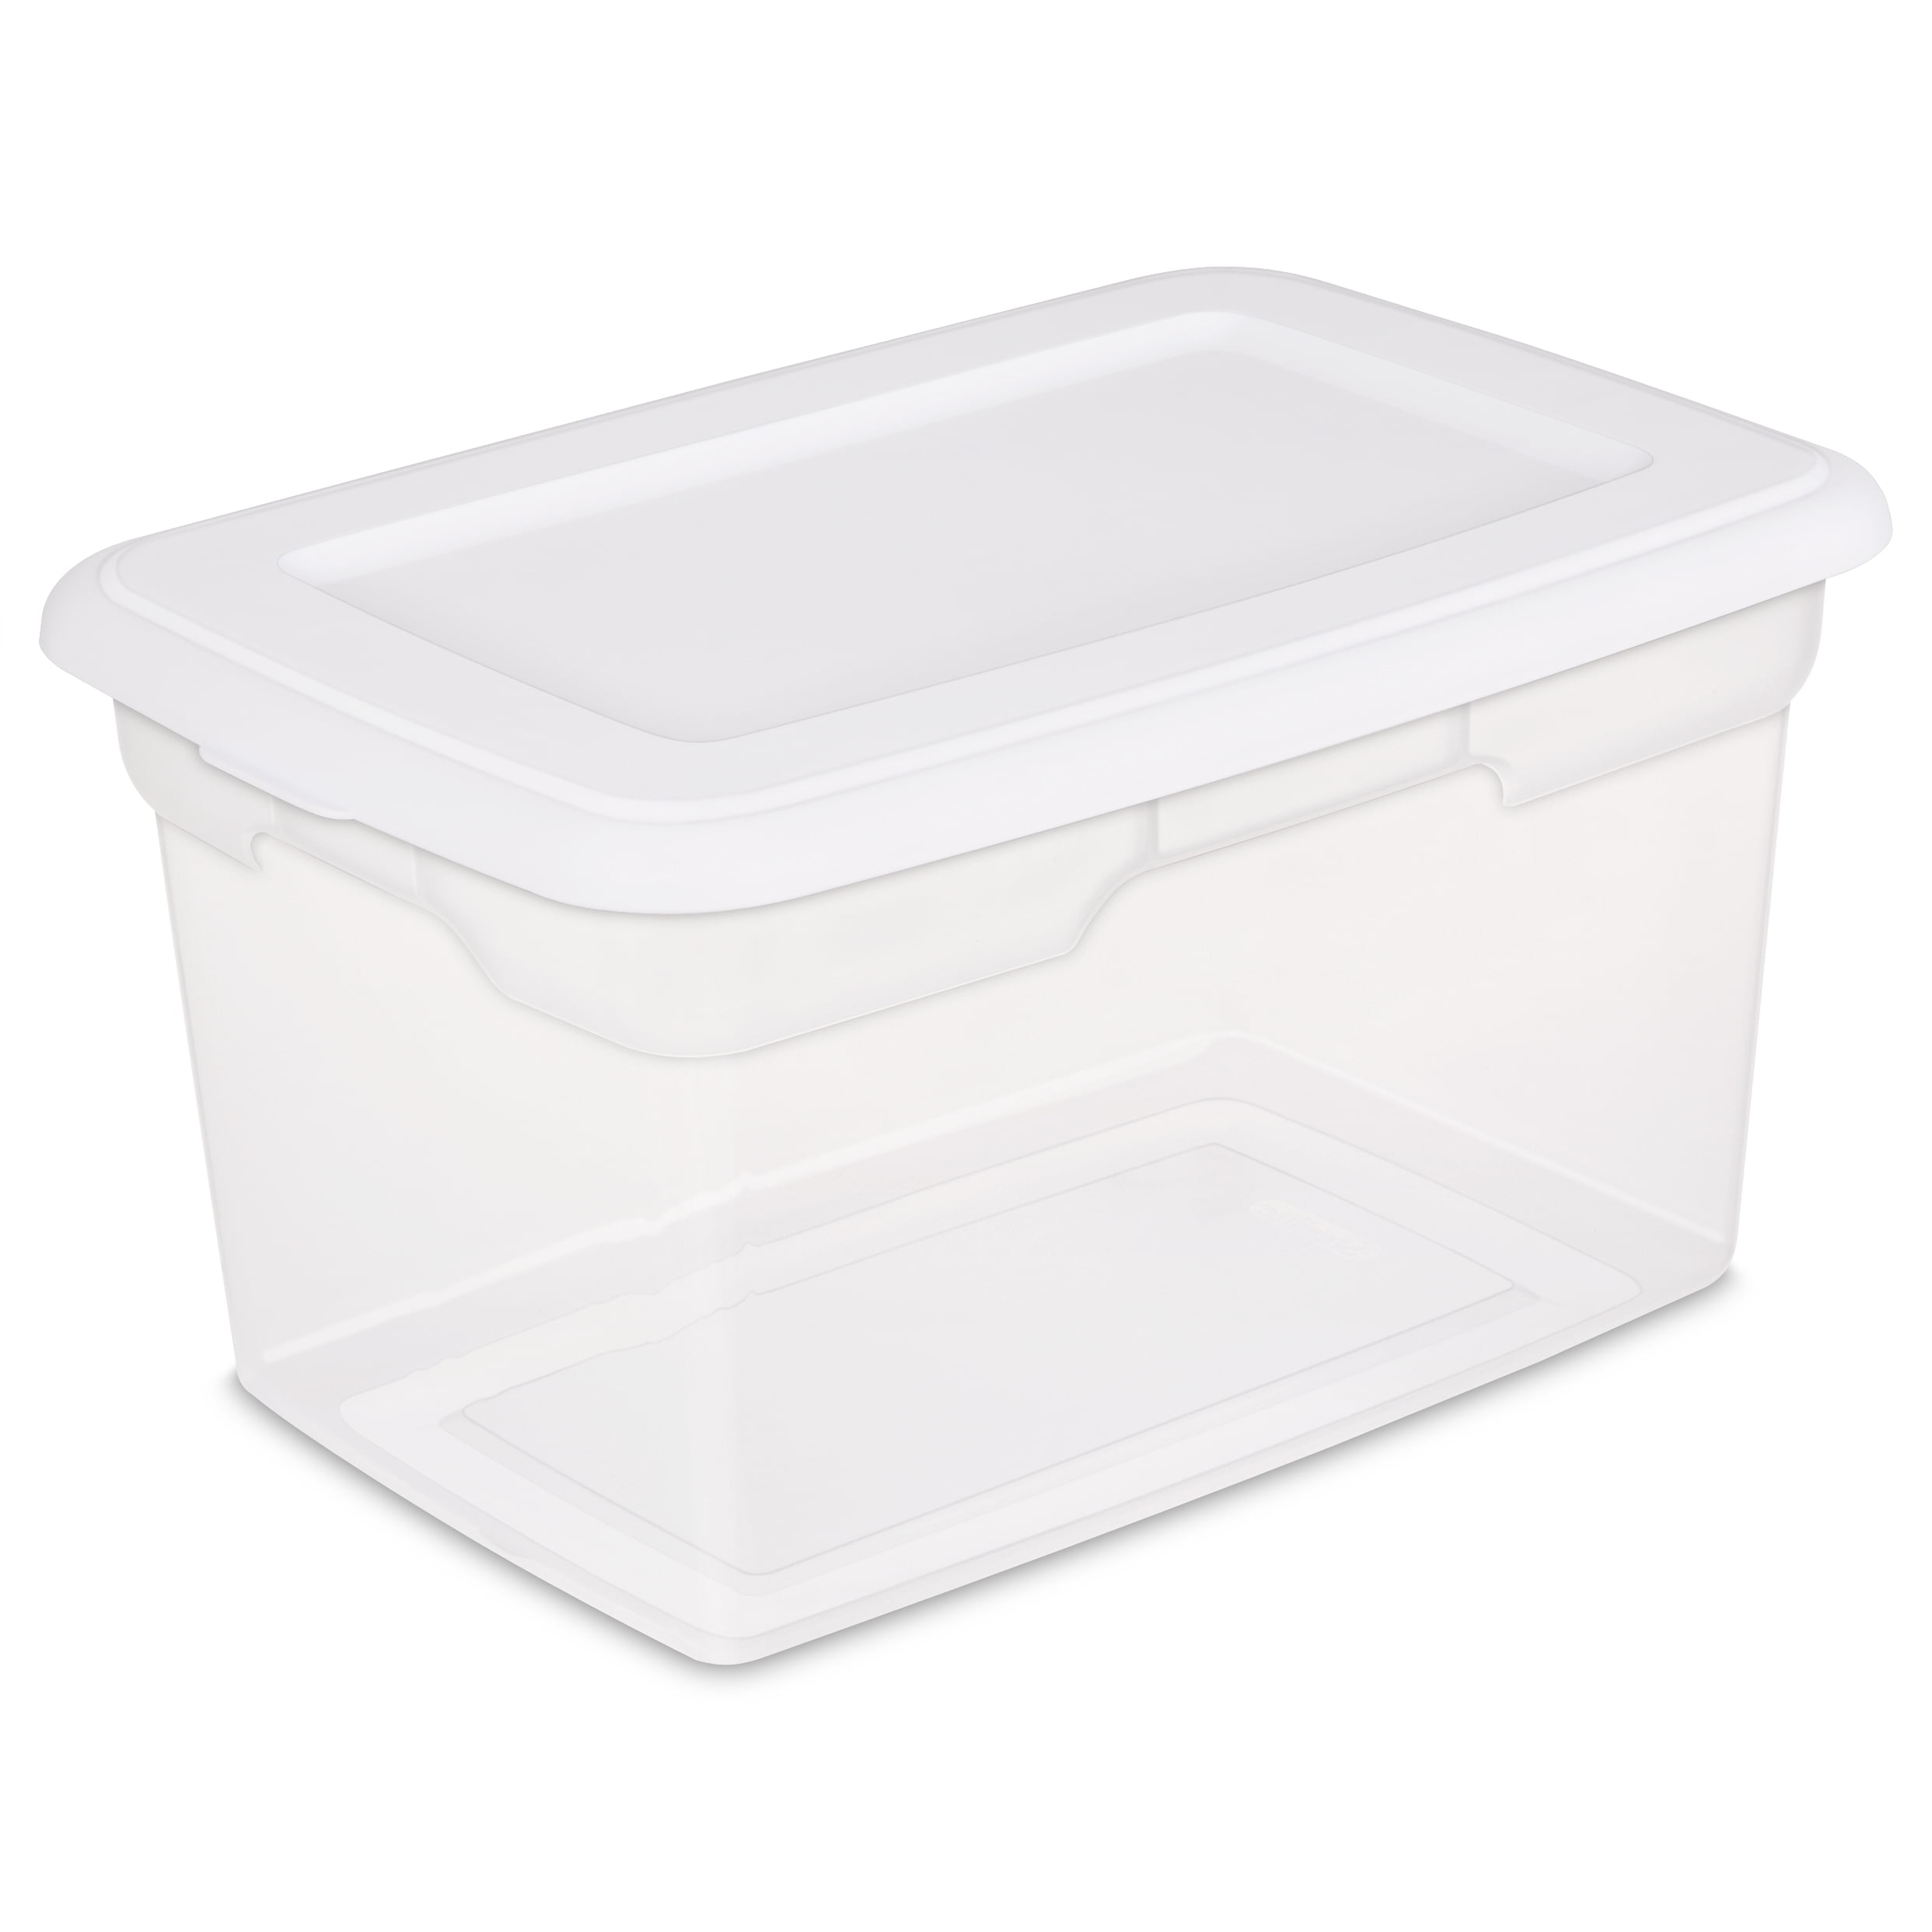 Clear 58 Qt Plastic Storage Box Case Of 8 W/ White Lid Stackable Container Bin 